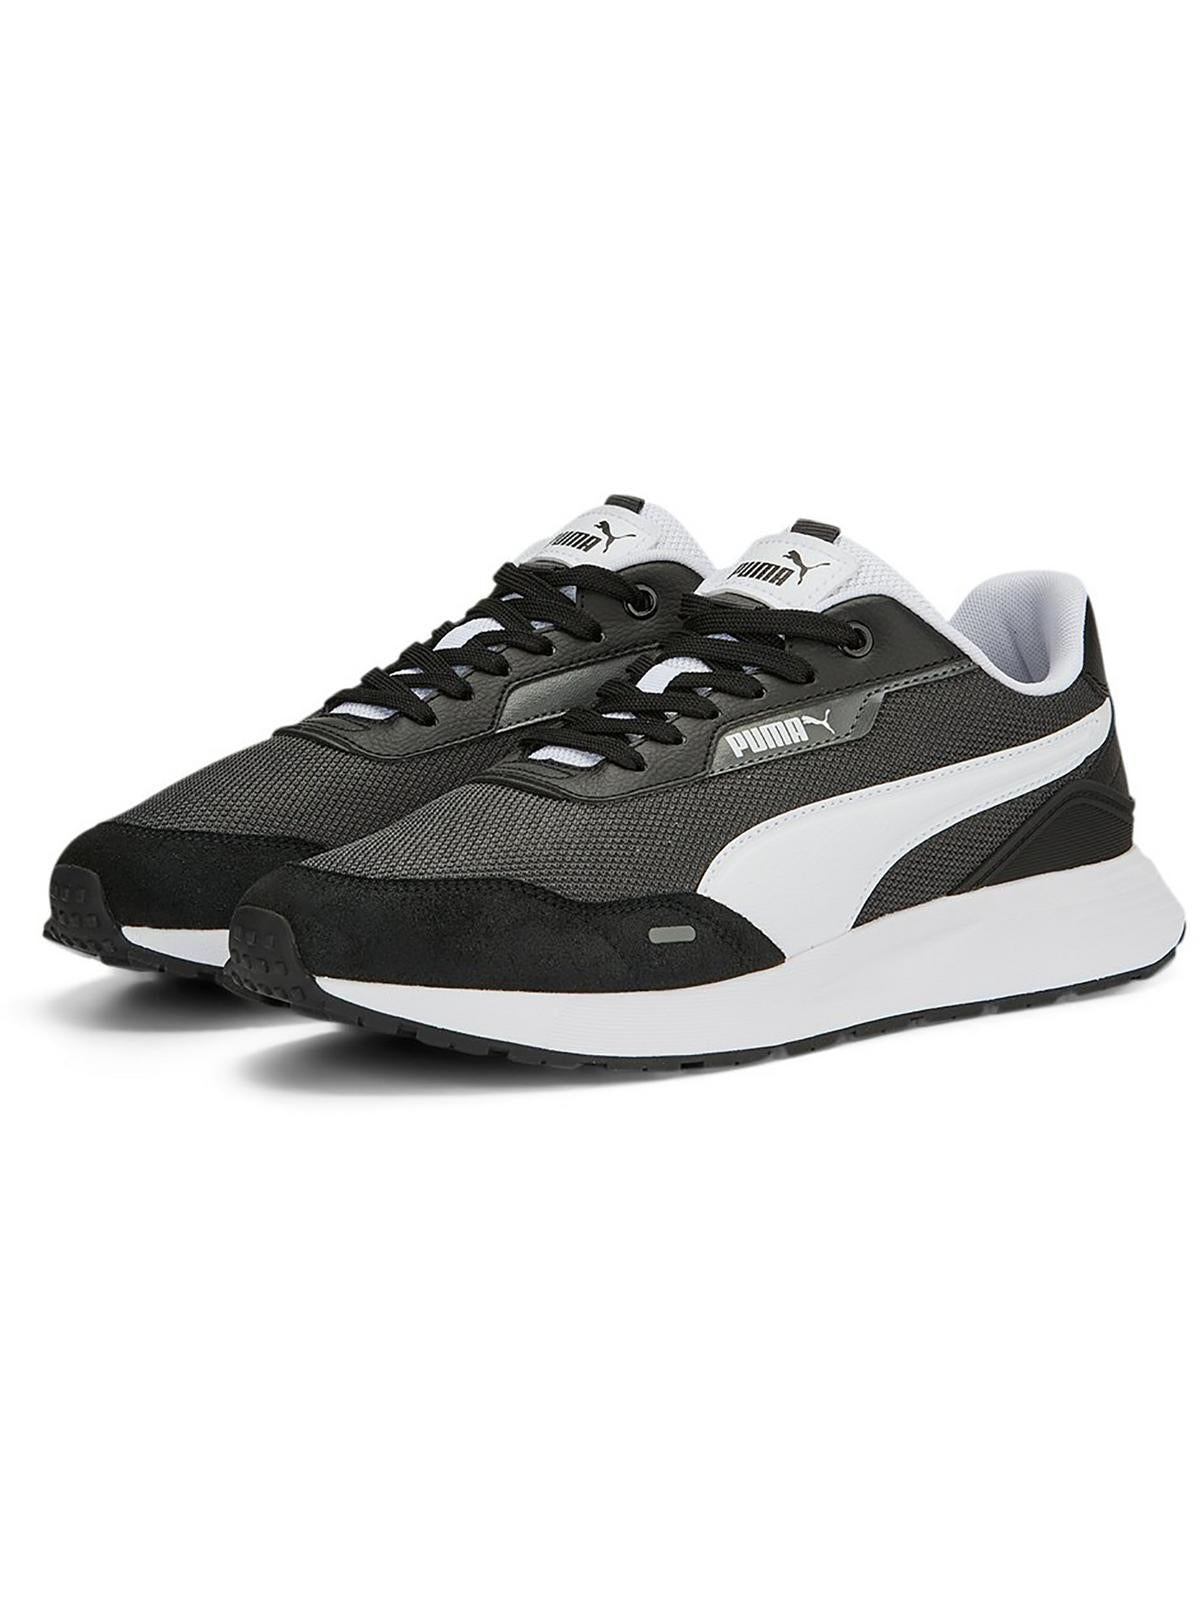 Puma Runtamed Plus Mens Fitness Workout Running & Training Shoes In Black